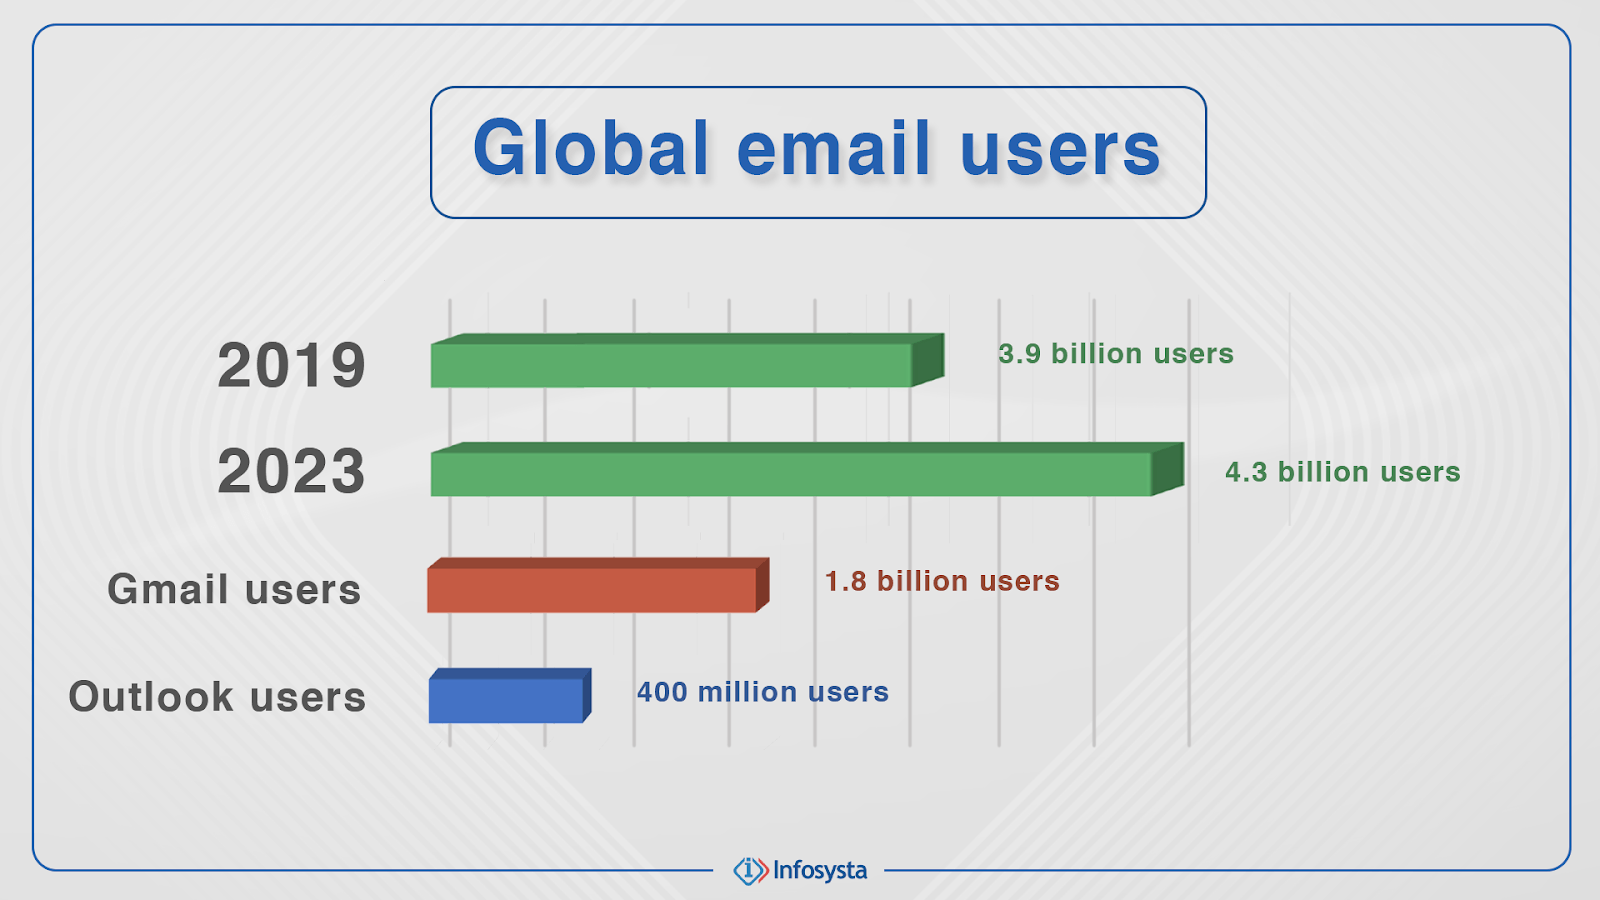 Global email users